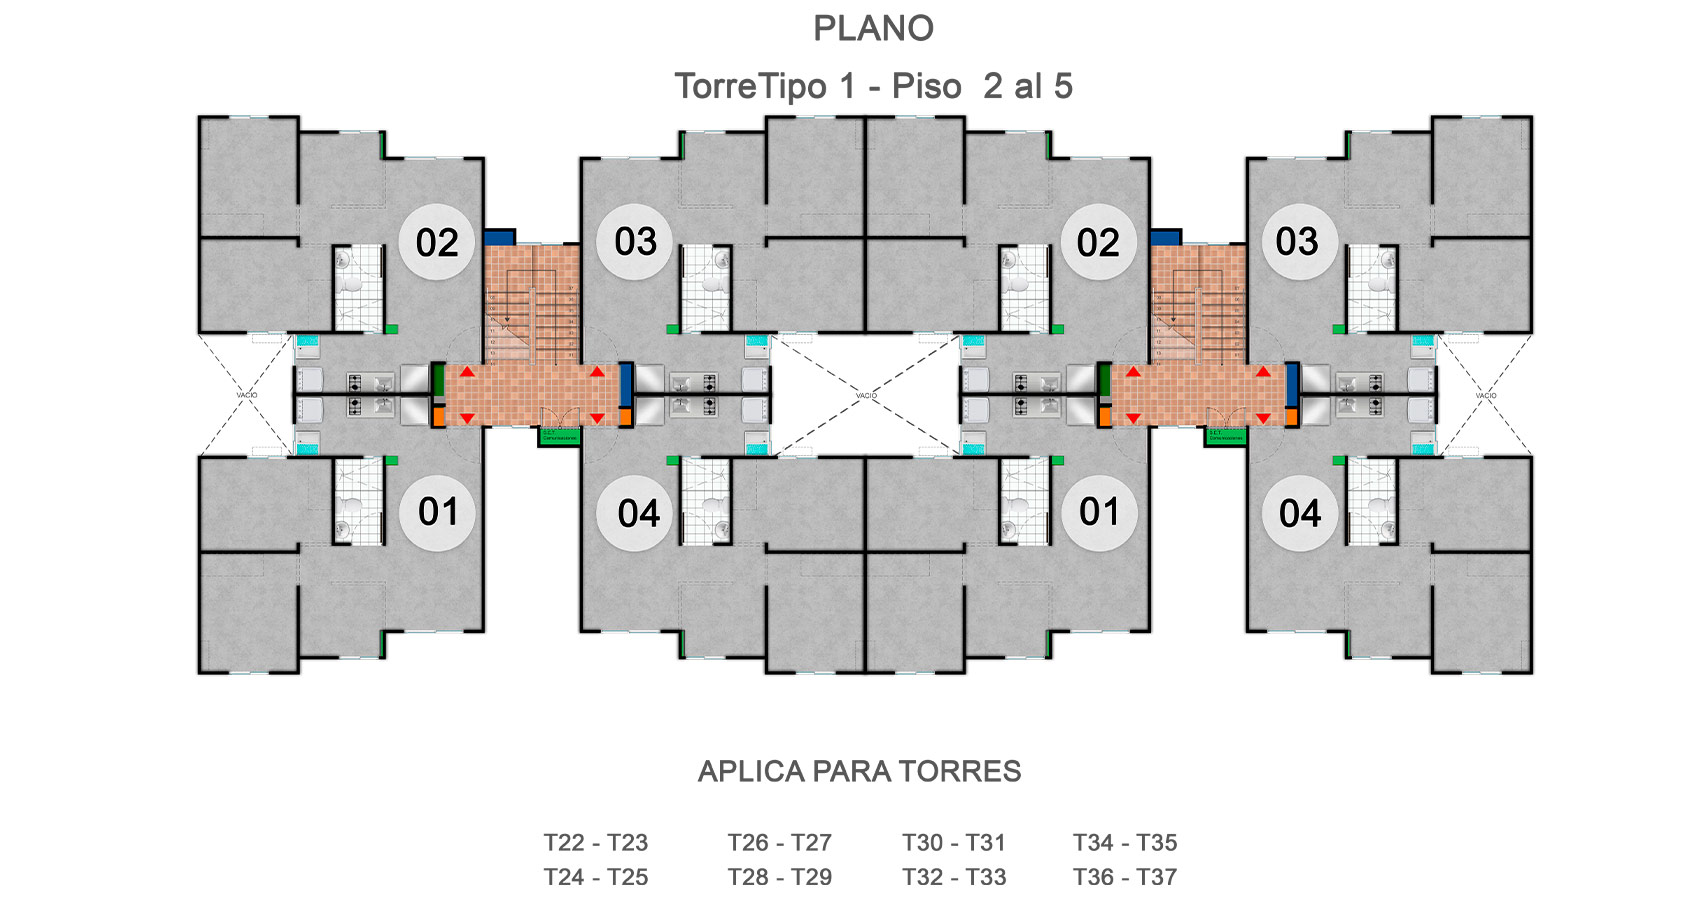 Plano Torre Tipo 1.